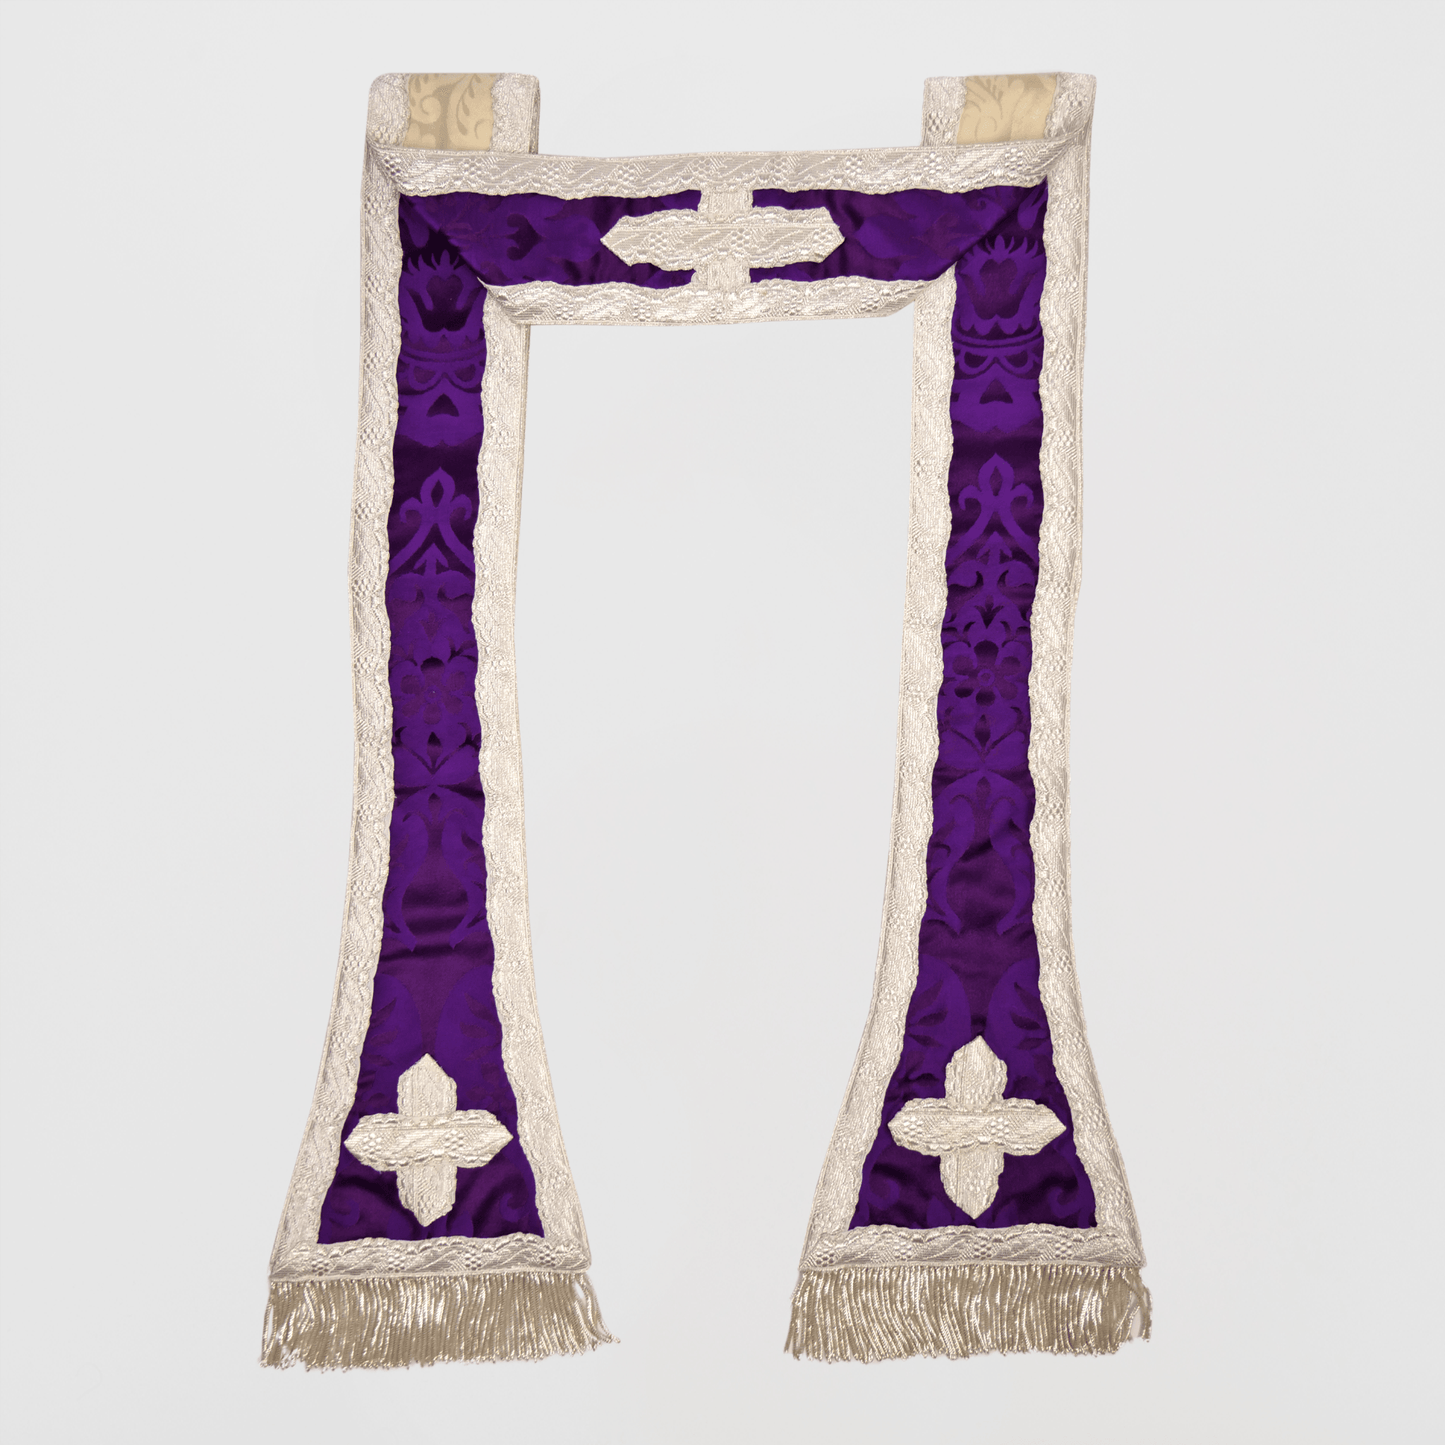 Reversible Spanish Stole in Royal Purple 'Gothic' and Cream 'Holbein' - Watts & Co.